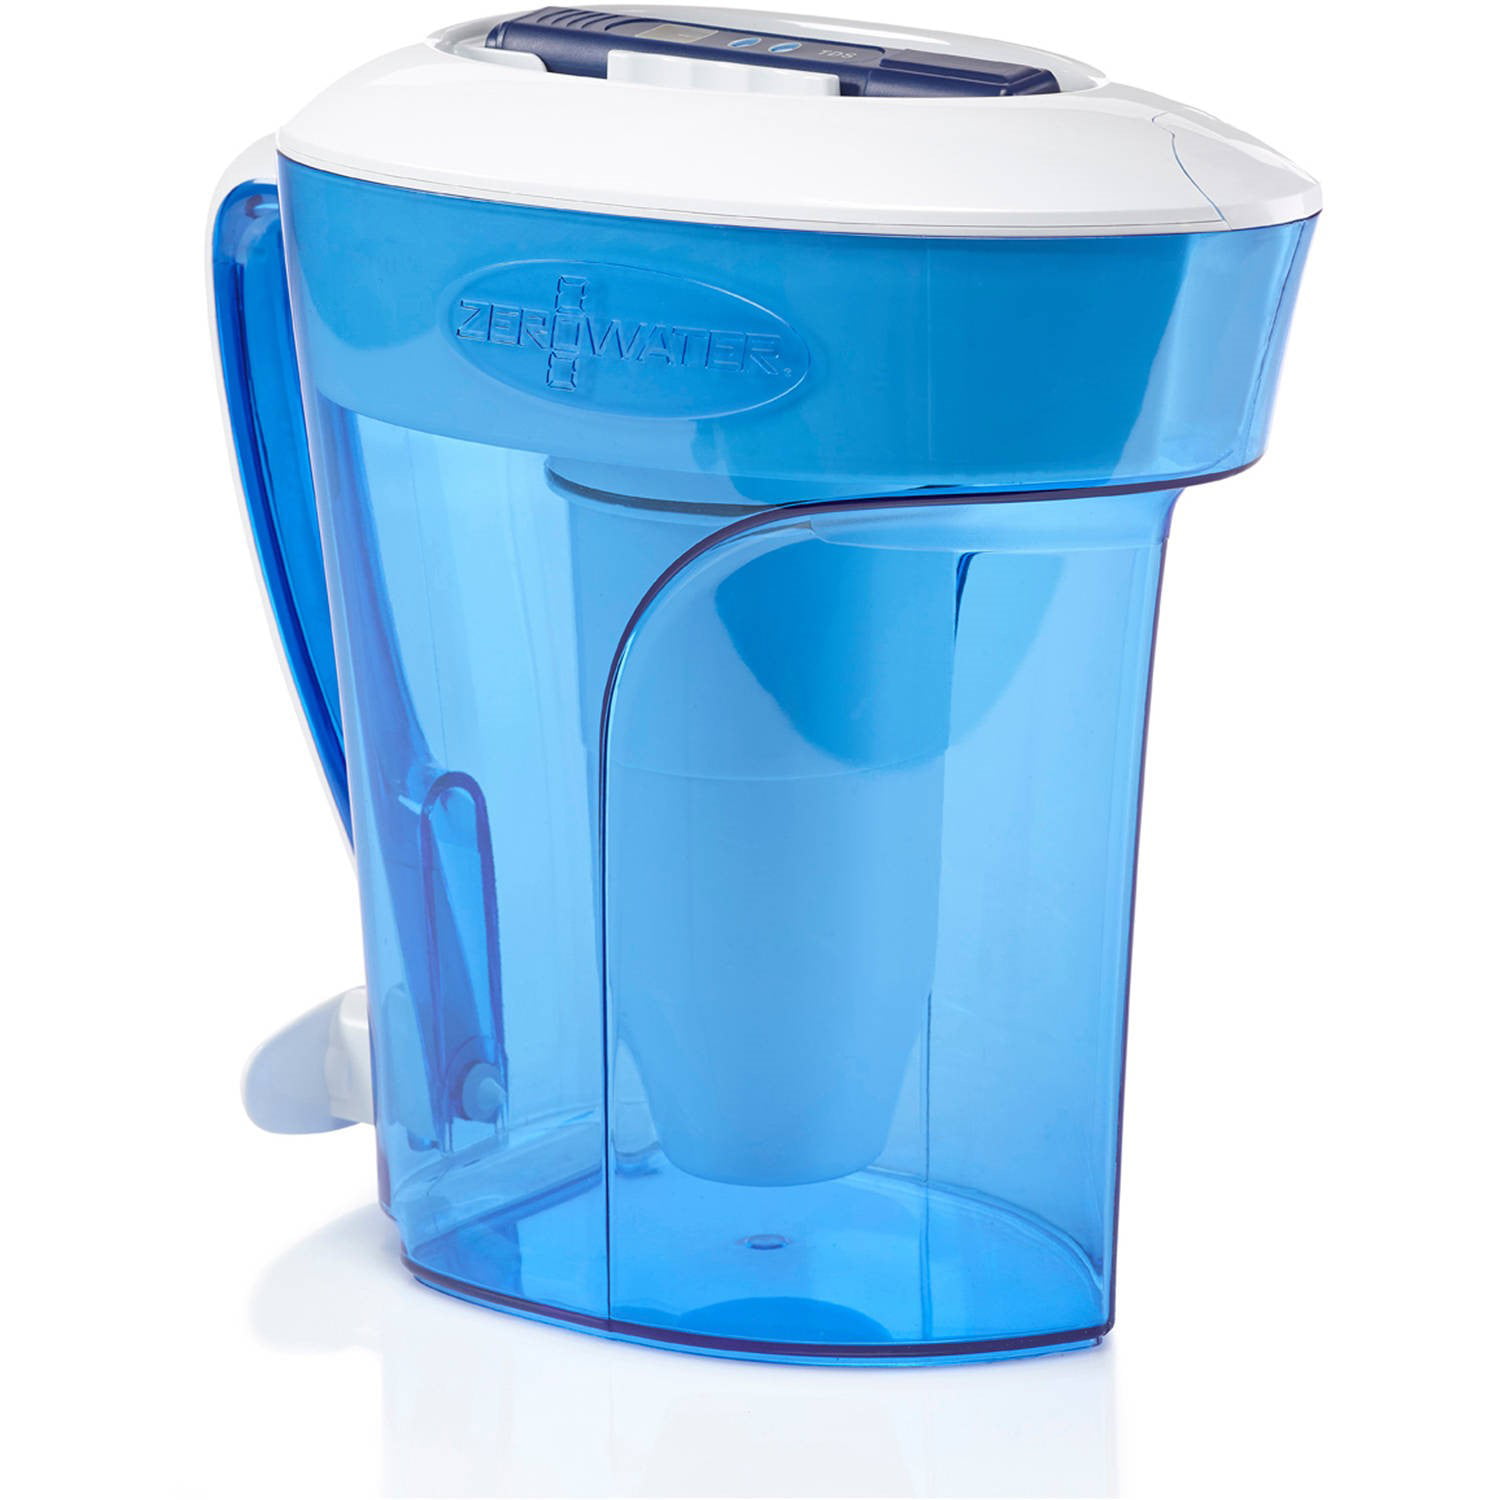 zerowater-12-cup-ready-pour-pitcher-with-free-water-quality-meter-zd